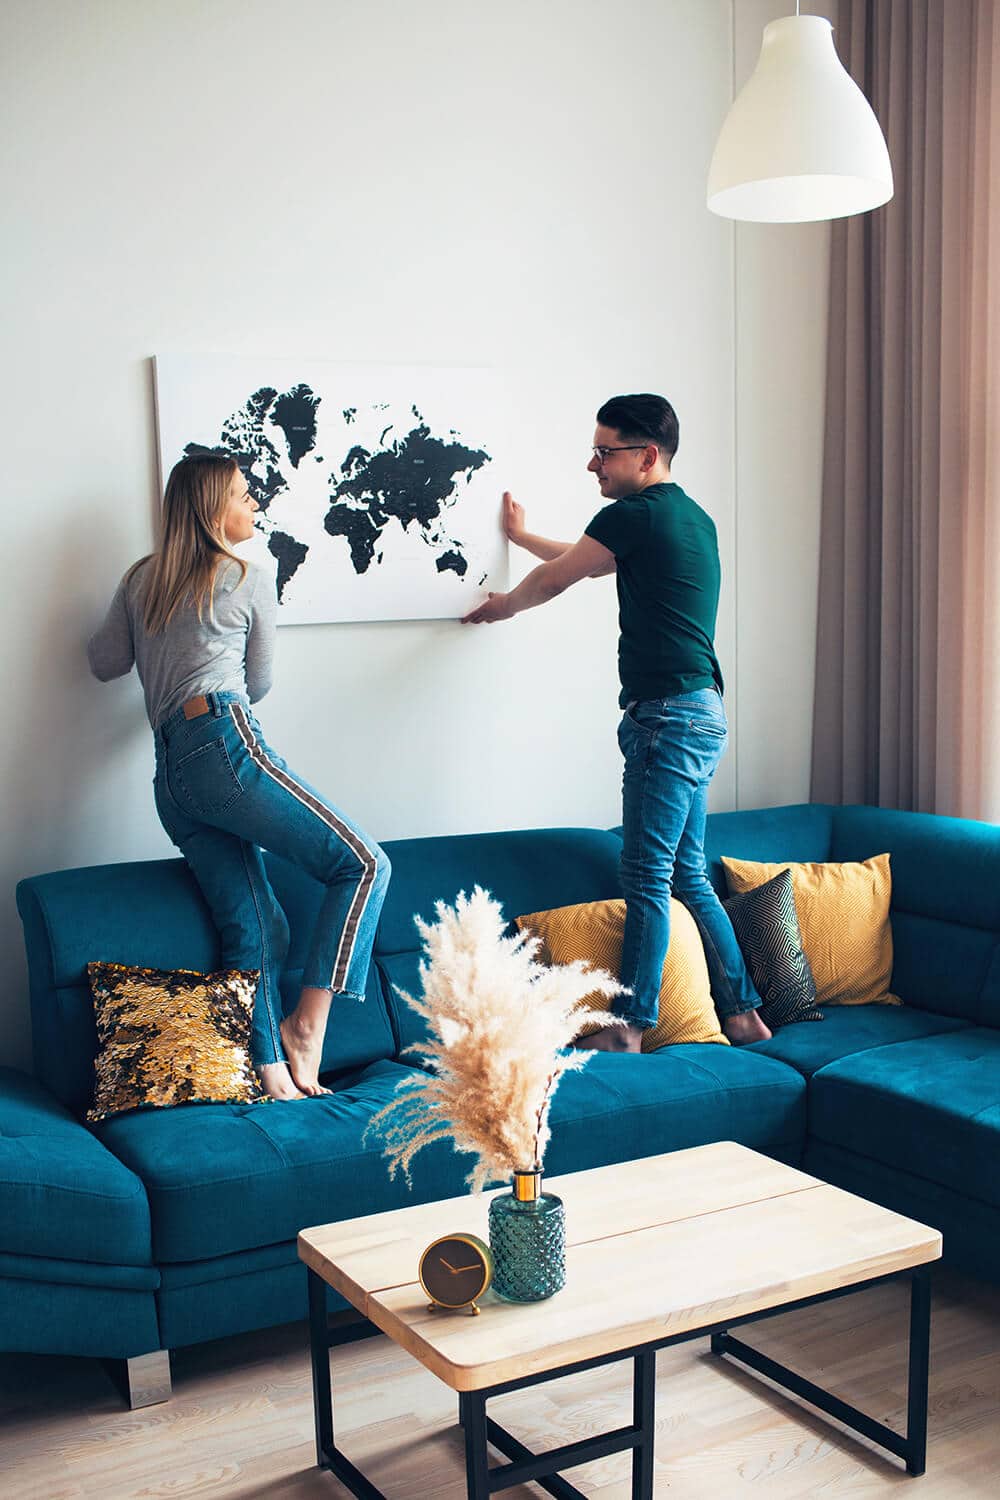 hanging on a wall travel map with pins